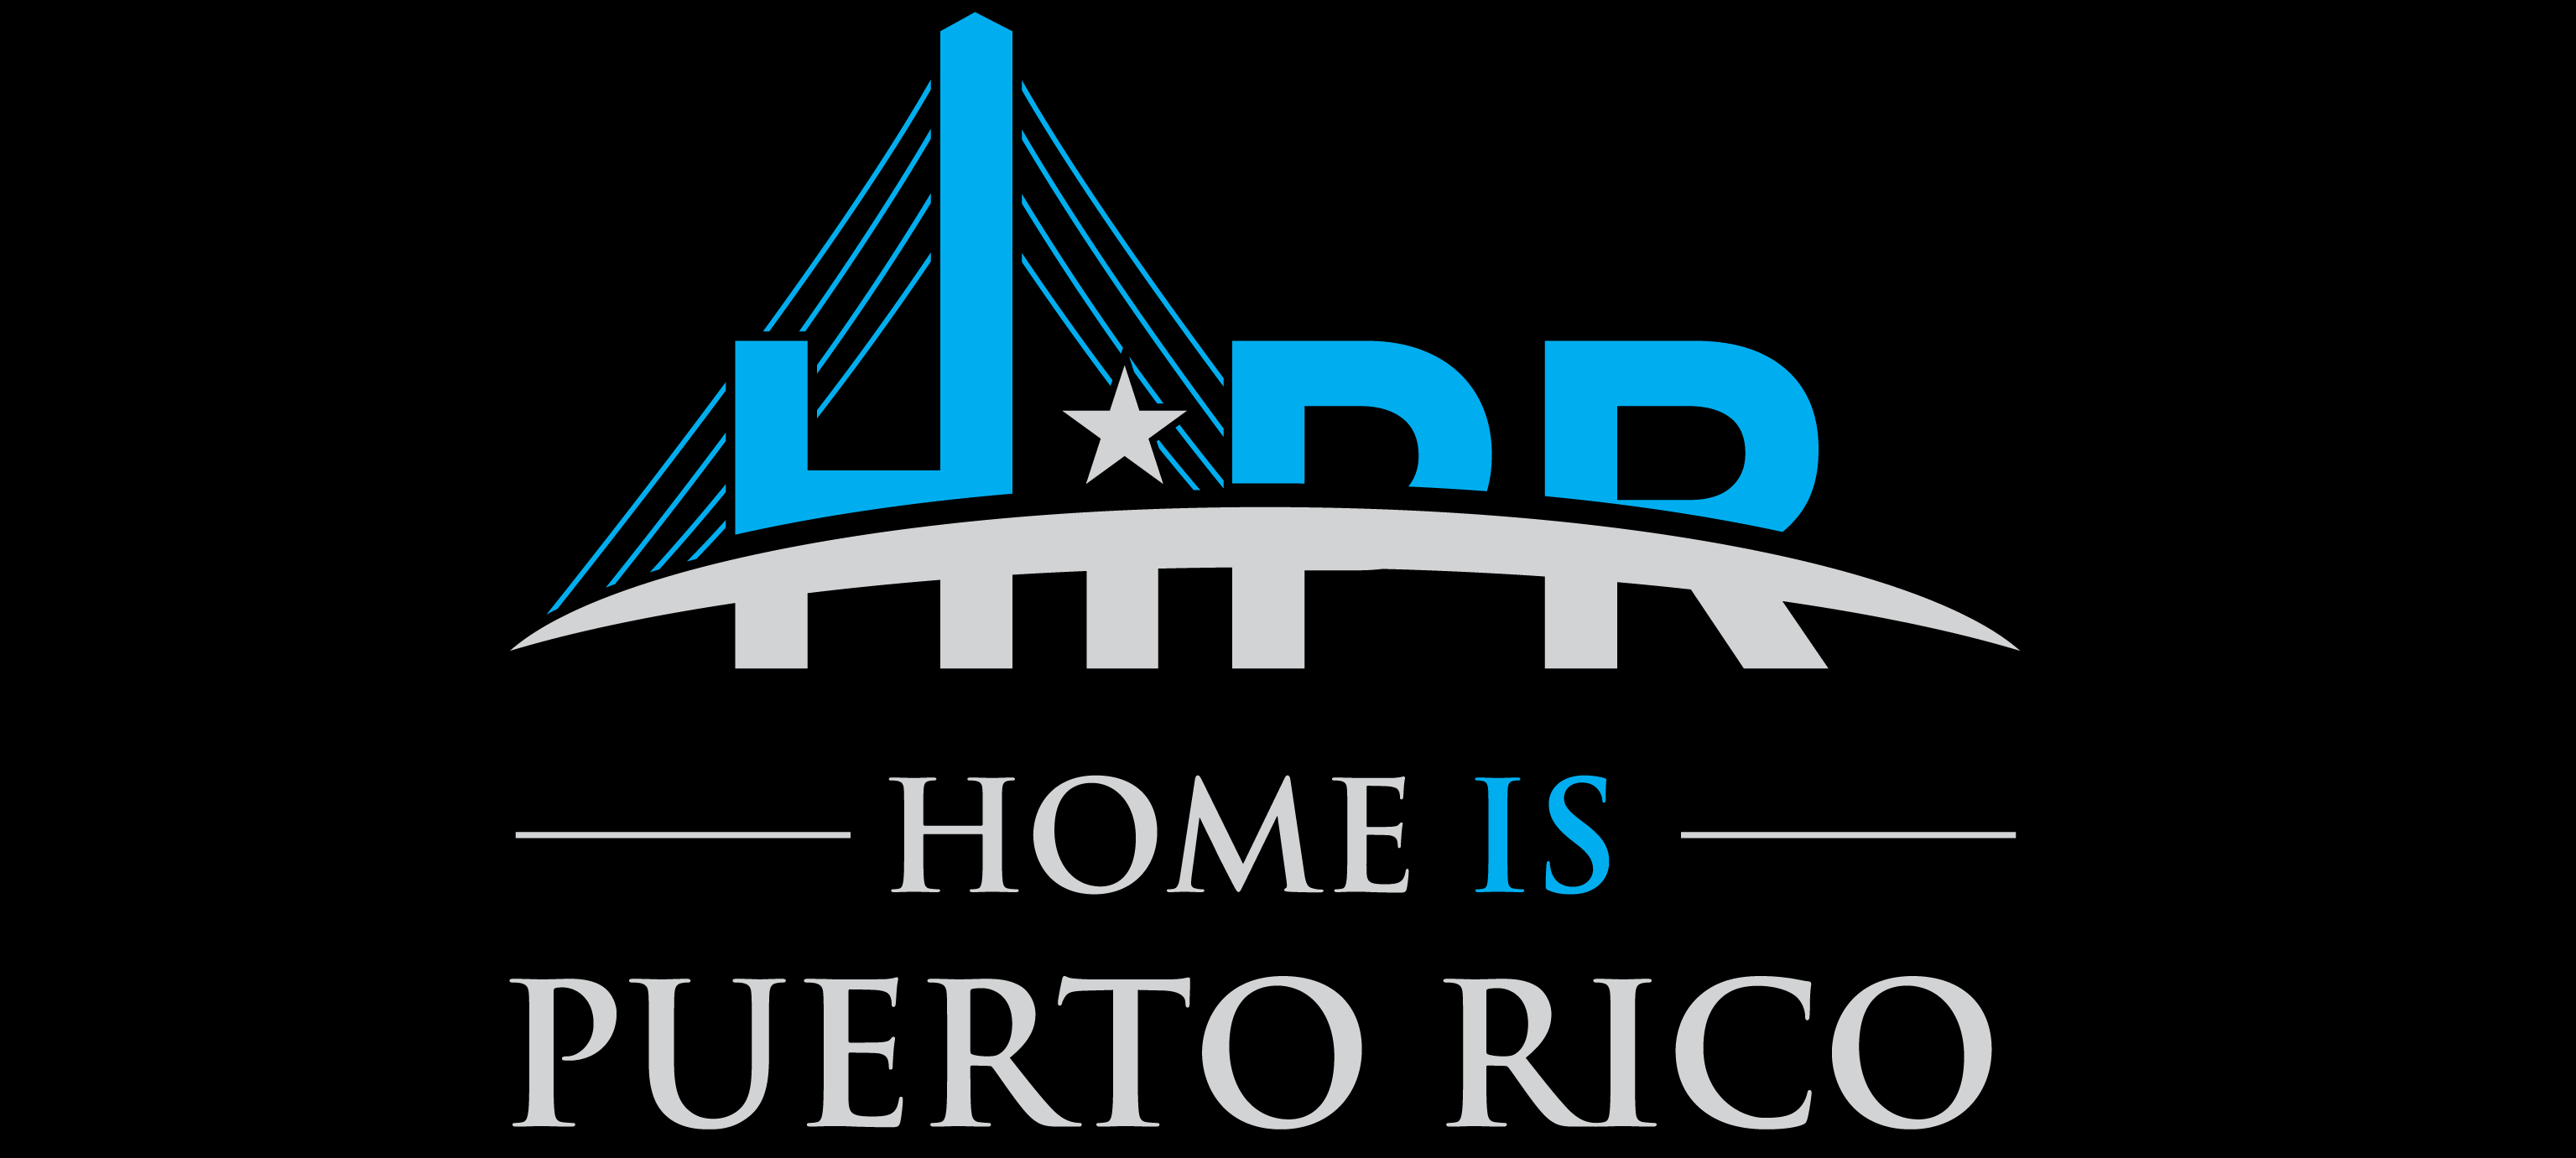 Home is Puerto Rico